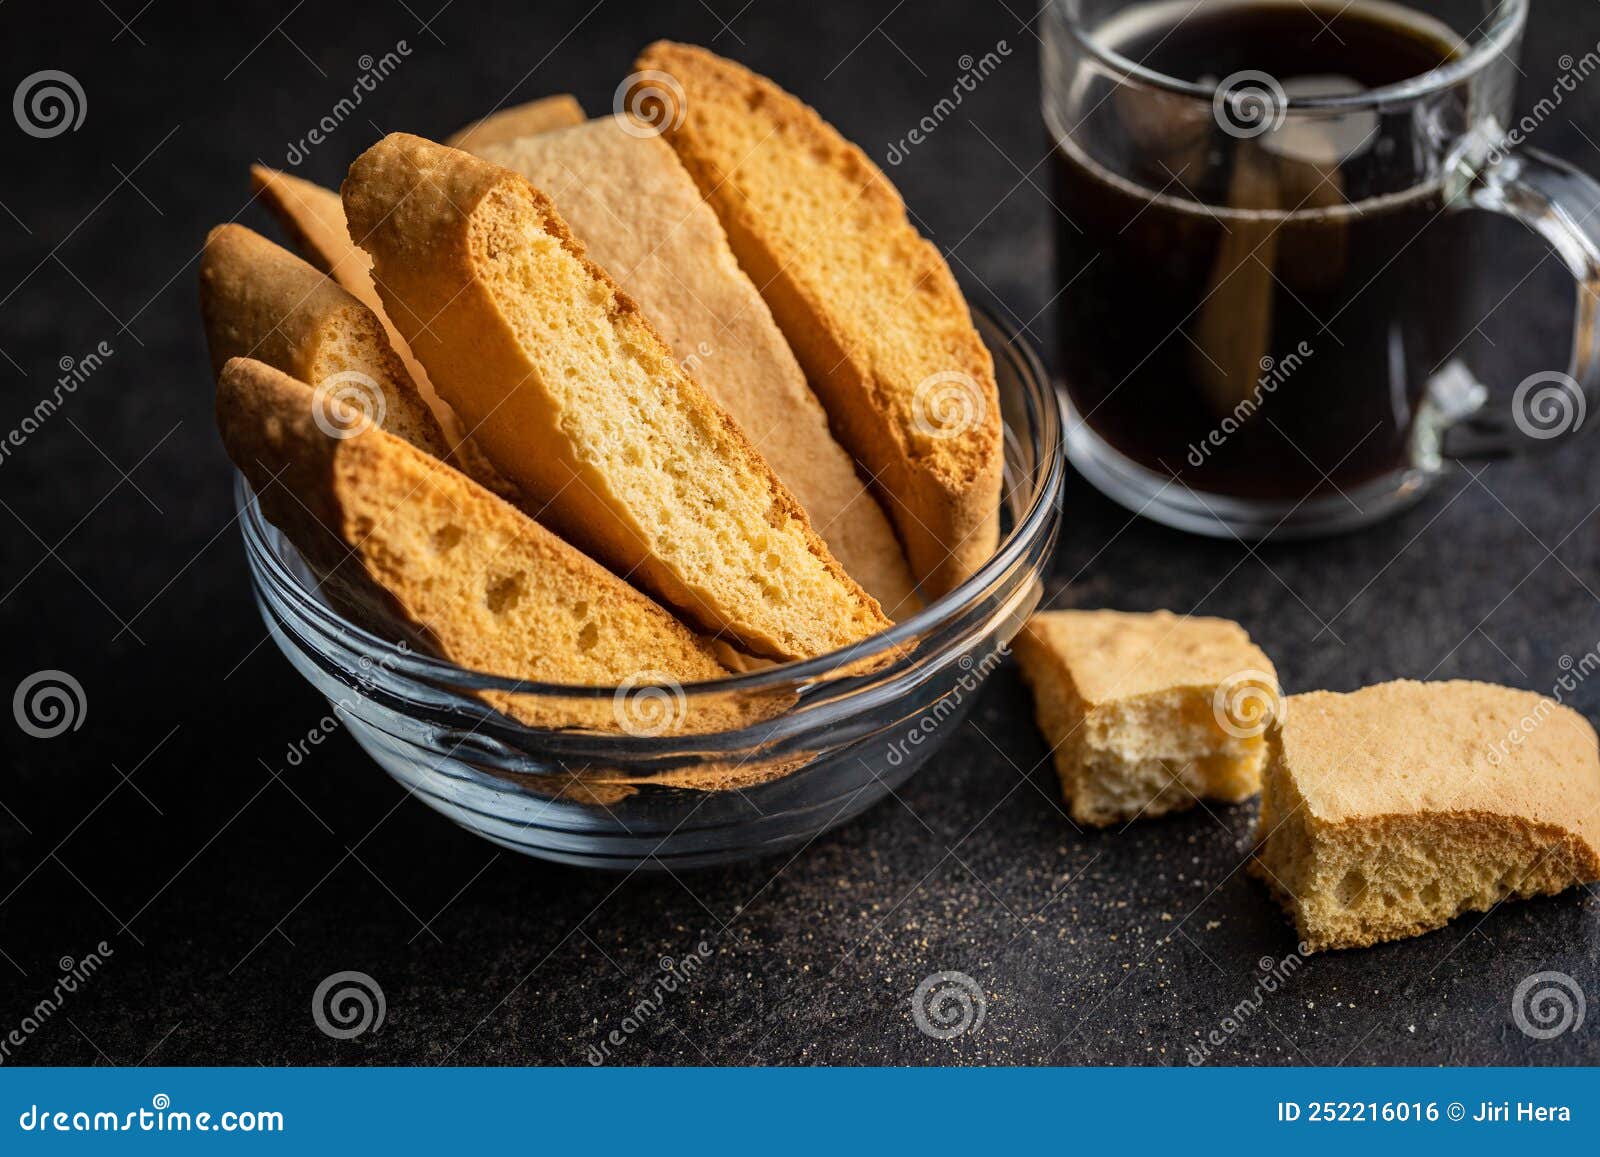 Sweet Anicini Cookies. Italian Biscotti with Anise Flavor in Bowl on ...